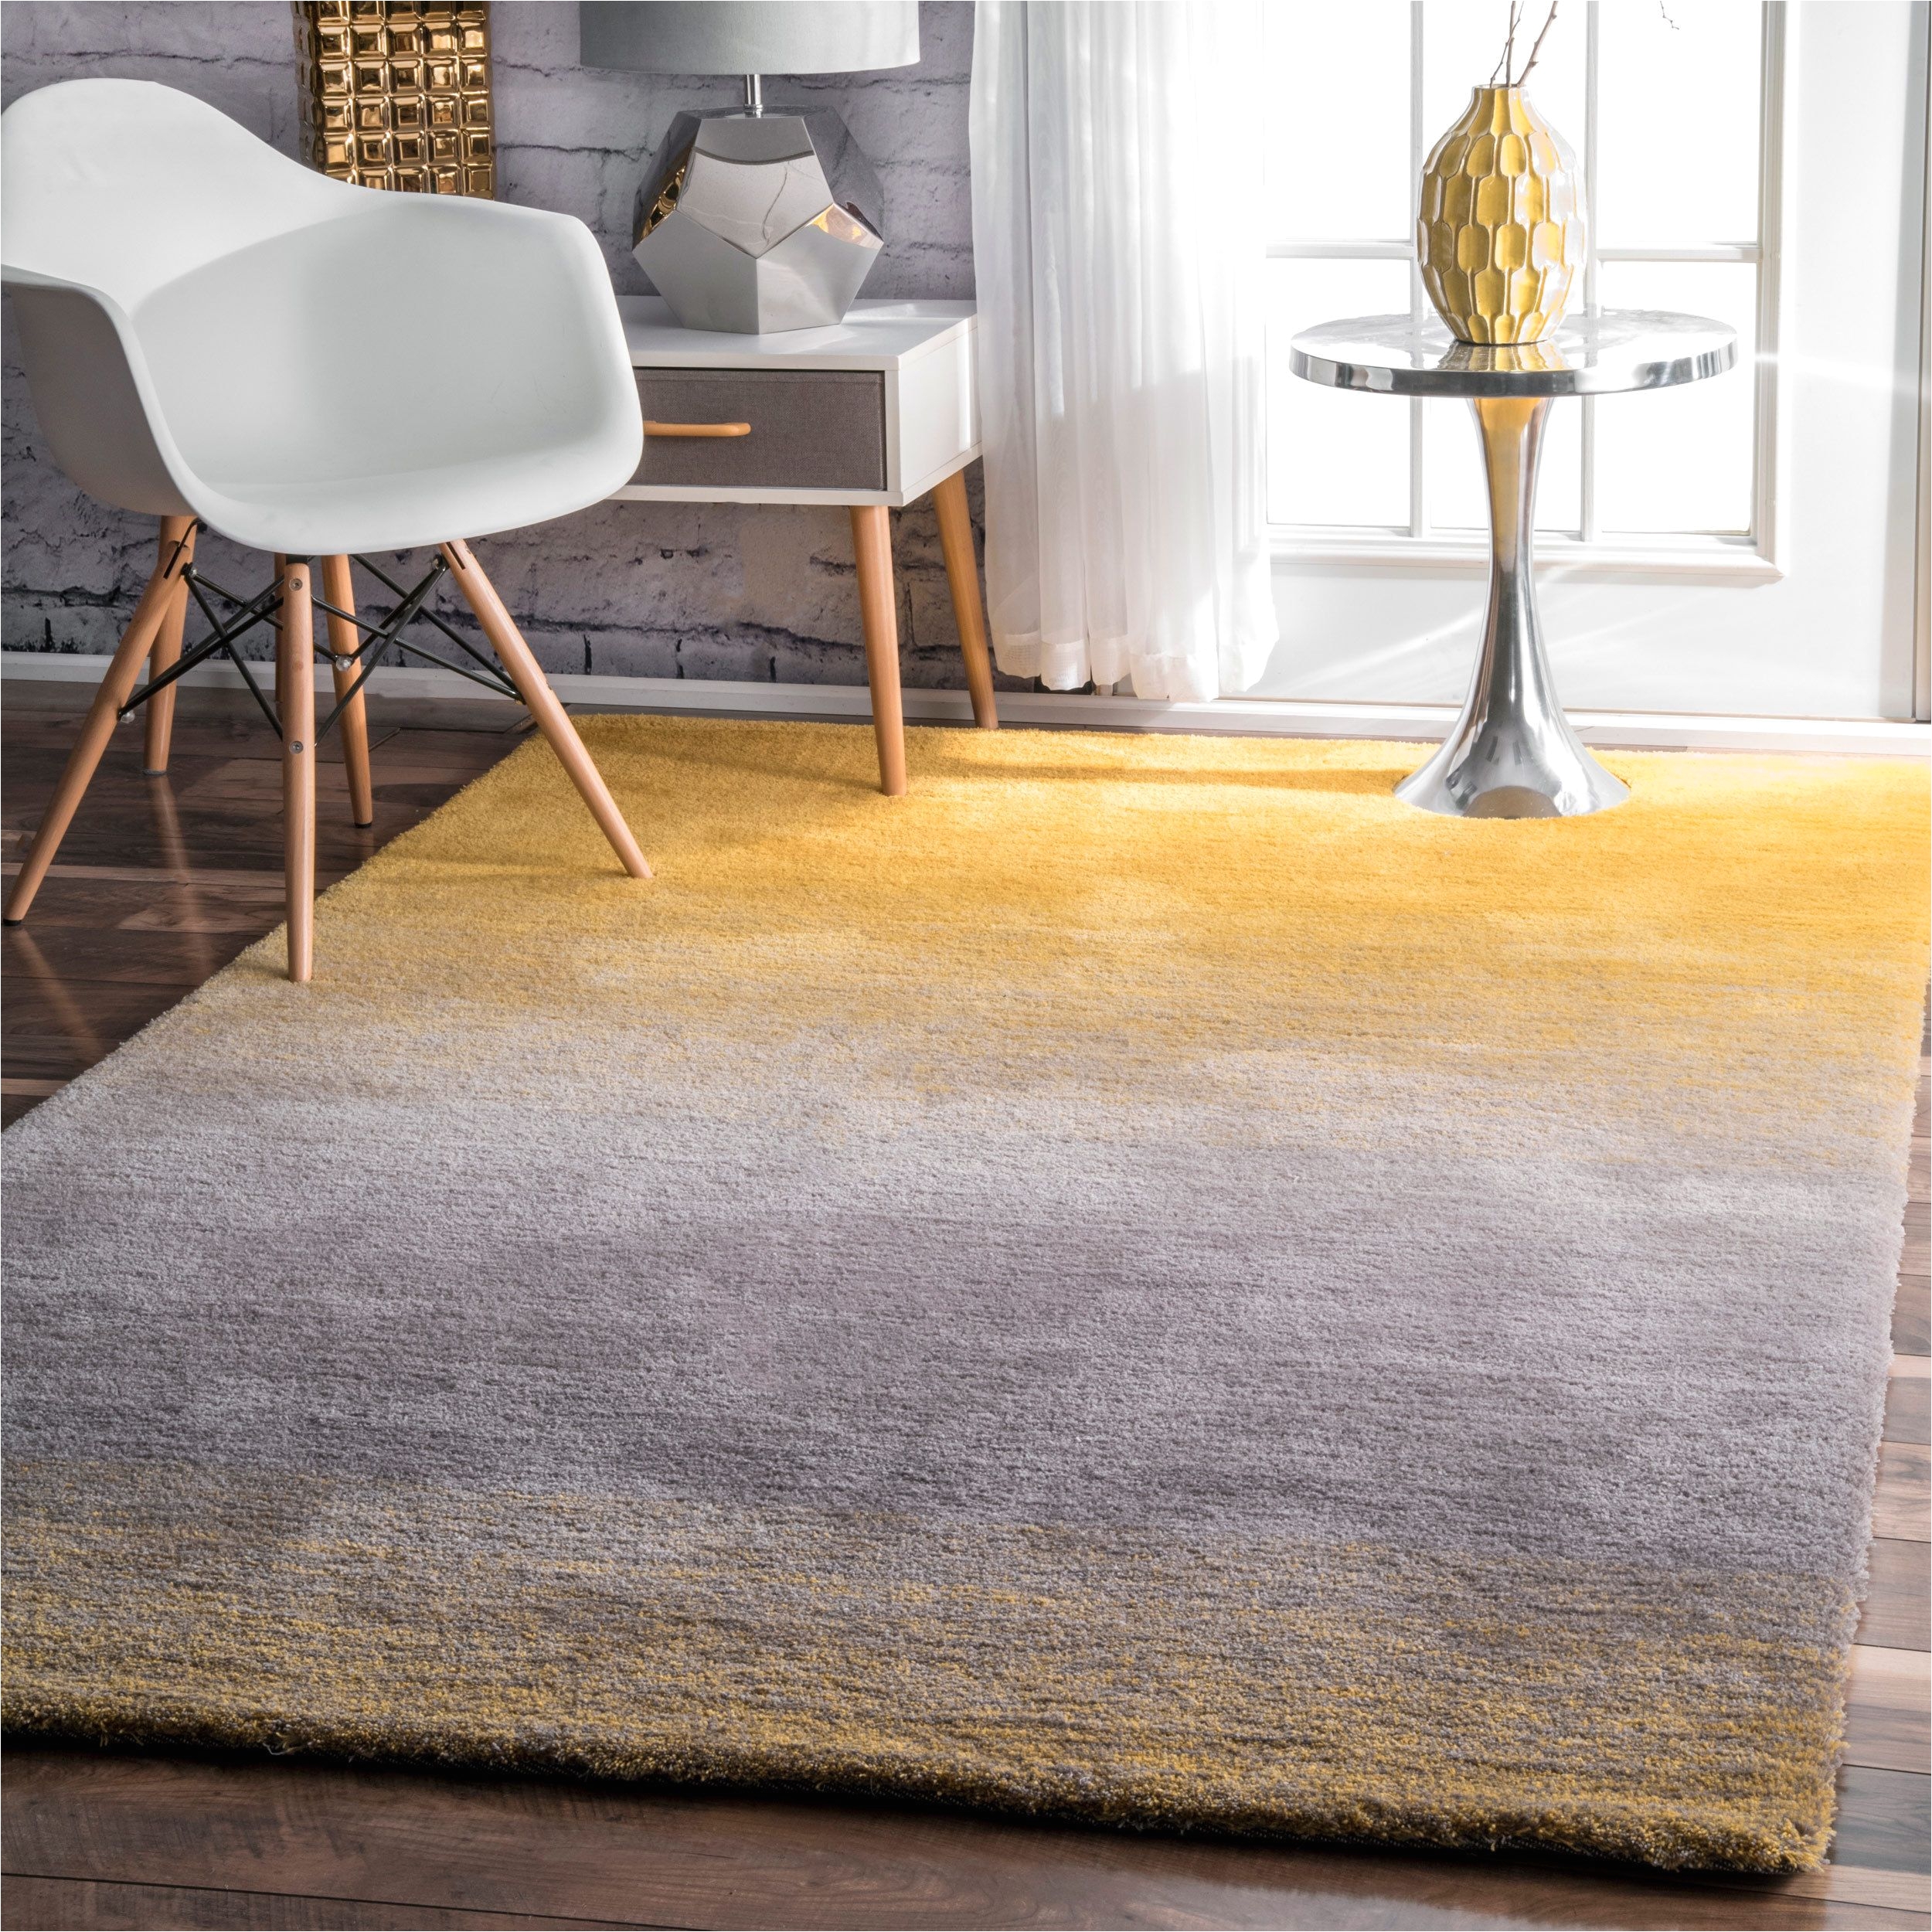 nuloom handmade soft and plush ombre shag yellow rug 4 x 6 yellow grey size 4 x 6 polyester abstract